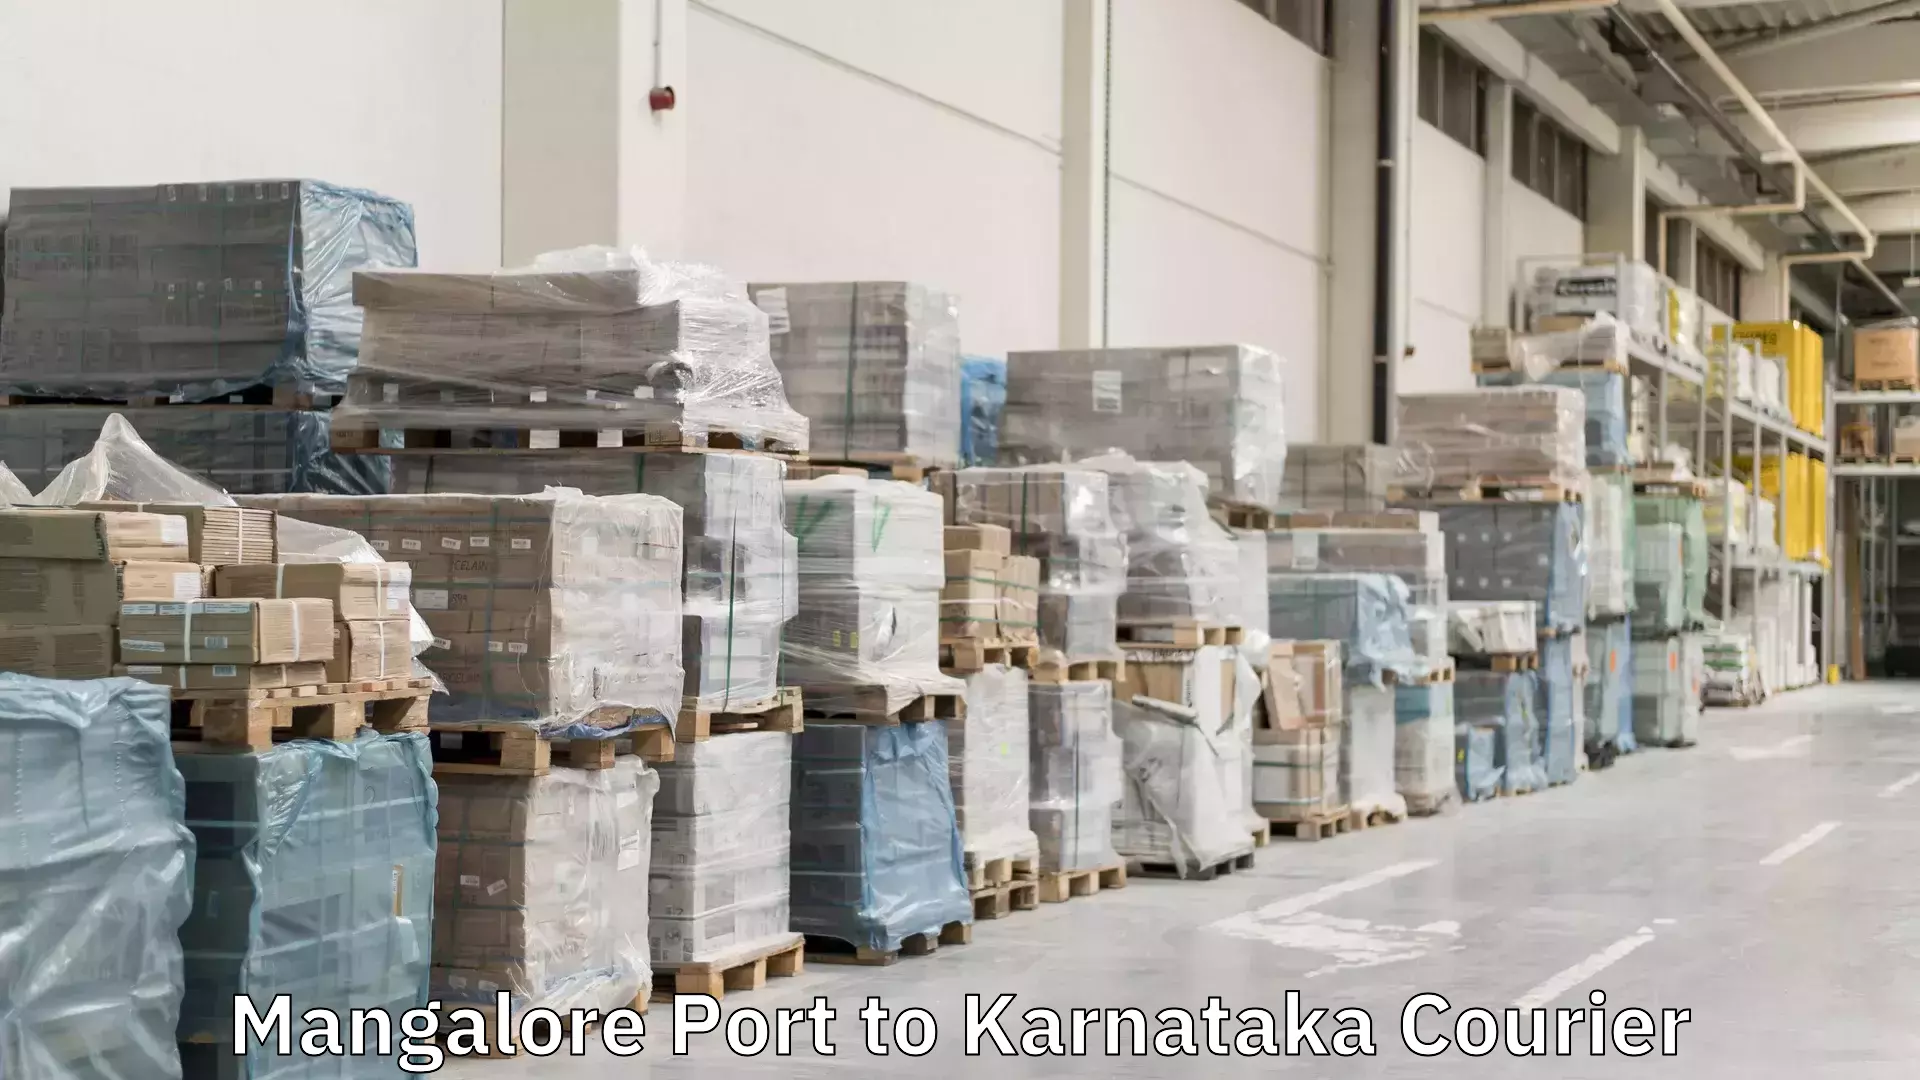 Personal parcel delivery Mangalore Port to Karnataka